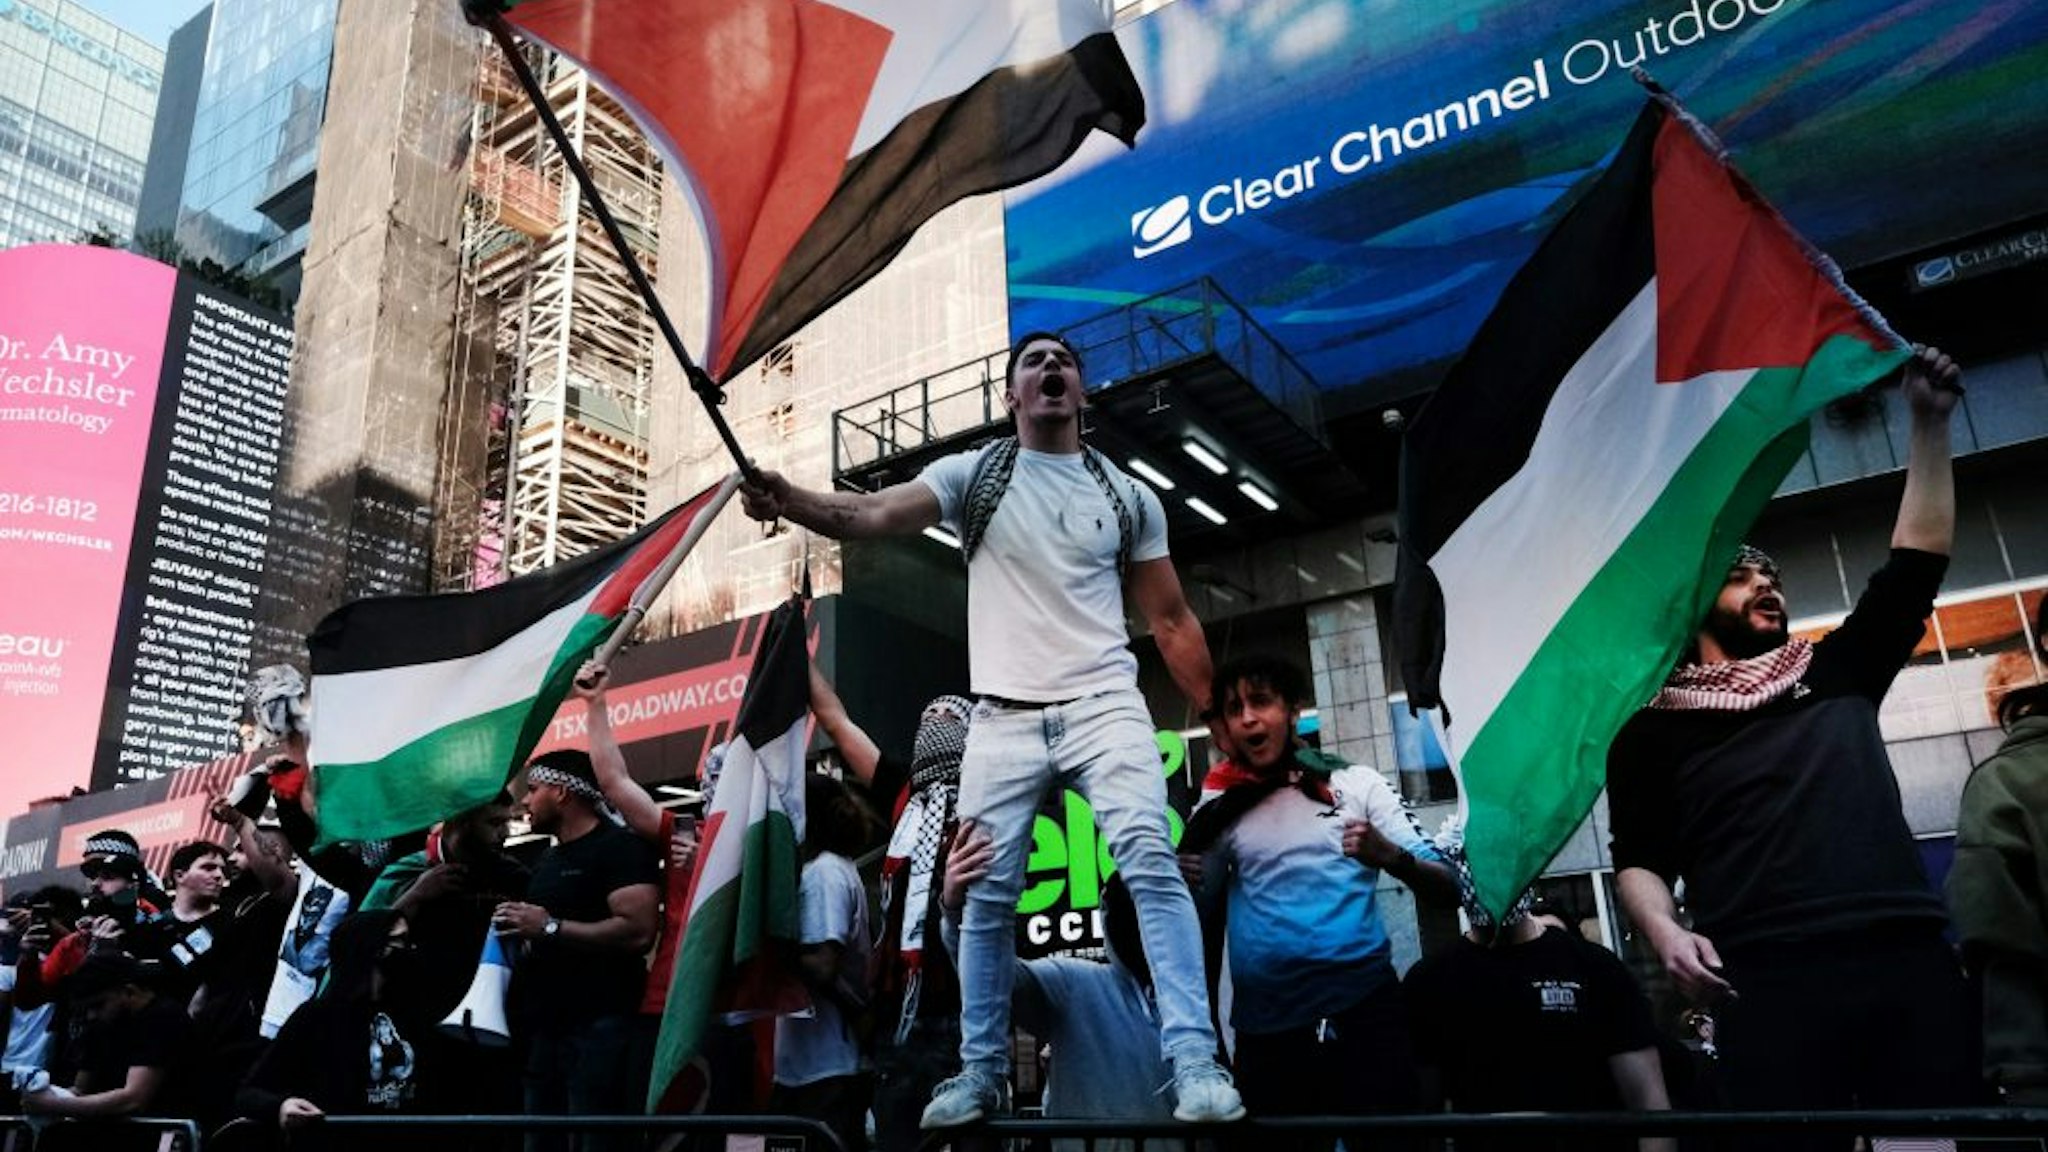 NEW YORK, NY - MAY 20: Pro Palestinian protesters face off with a group of Israel supporters and police in a violent clash in Times Square on May 20, 2021 in New York City. Despite an announcement of a cease fire between Israel and Gaza militants, dozens of supporters of both sides of the conflict fought in the streets of Times Square. Dozens were arrested and detained by police before they were dispersed out of the square. The 11 days of fighting has claimed the lives of at least 232 people in Gaza and 12 in Israel.